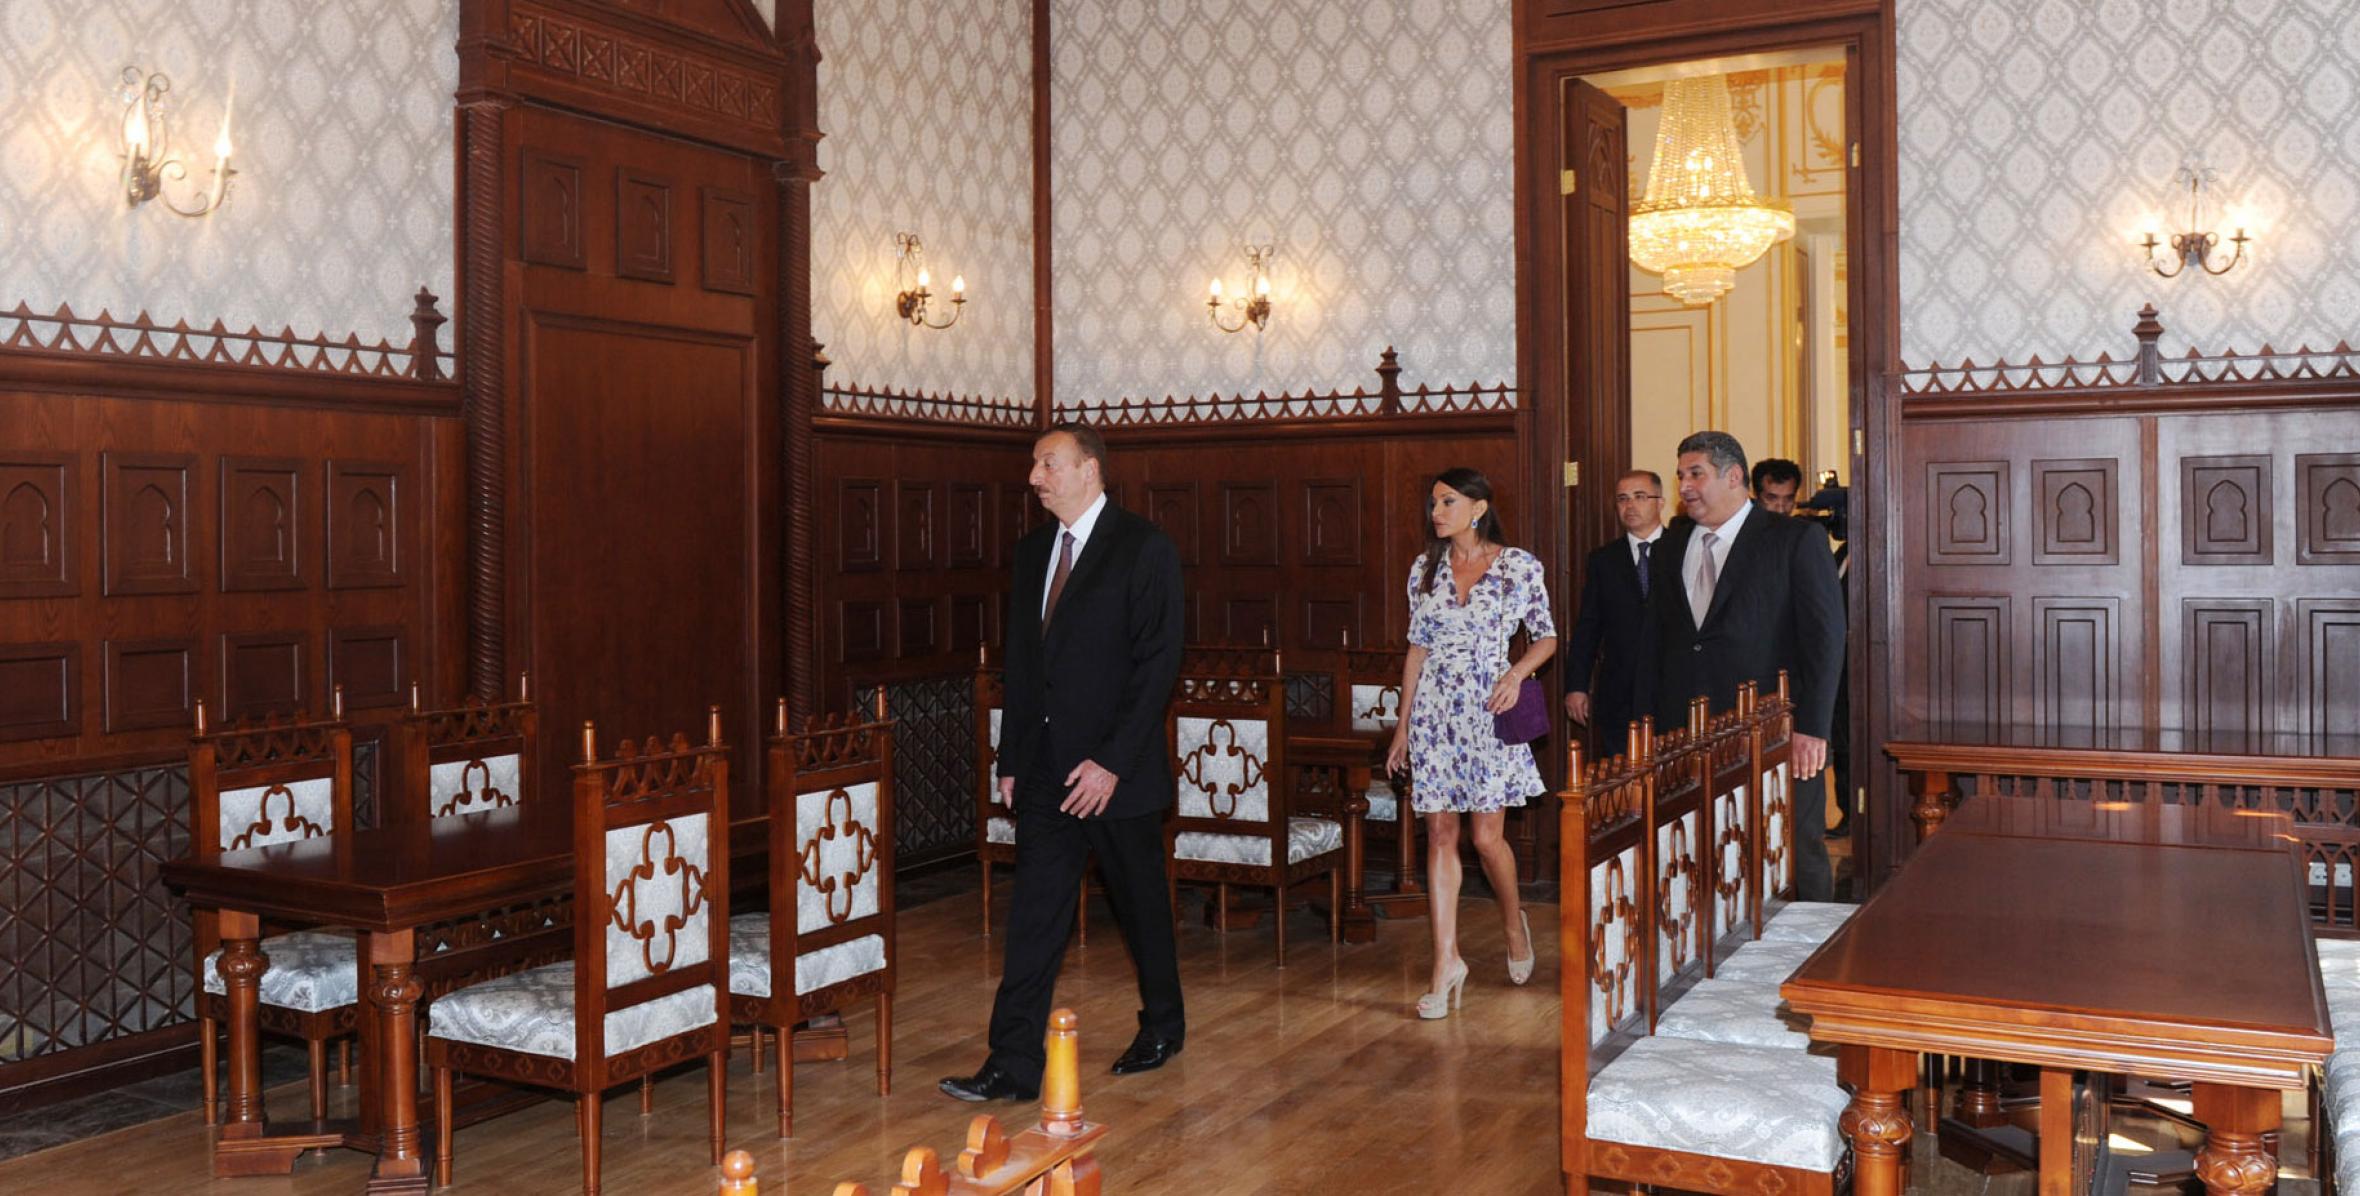 Ilham Aliyev attended the opening of the Palace of Happiness after major overhaul